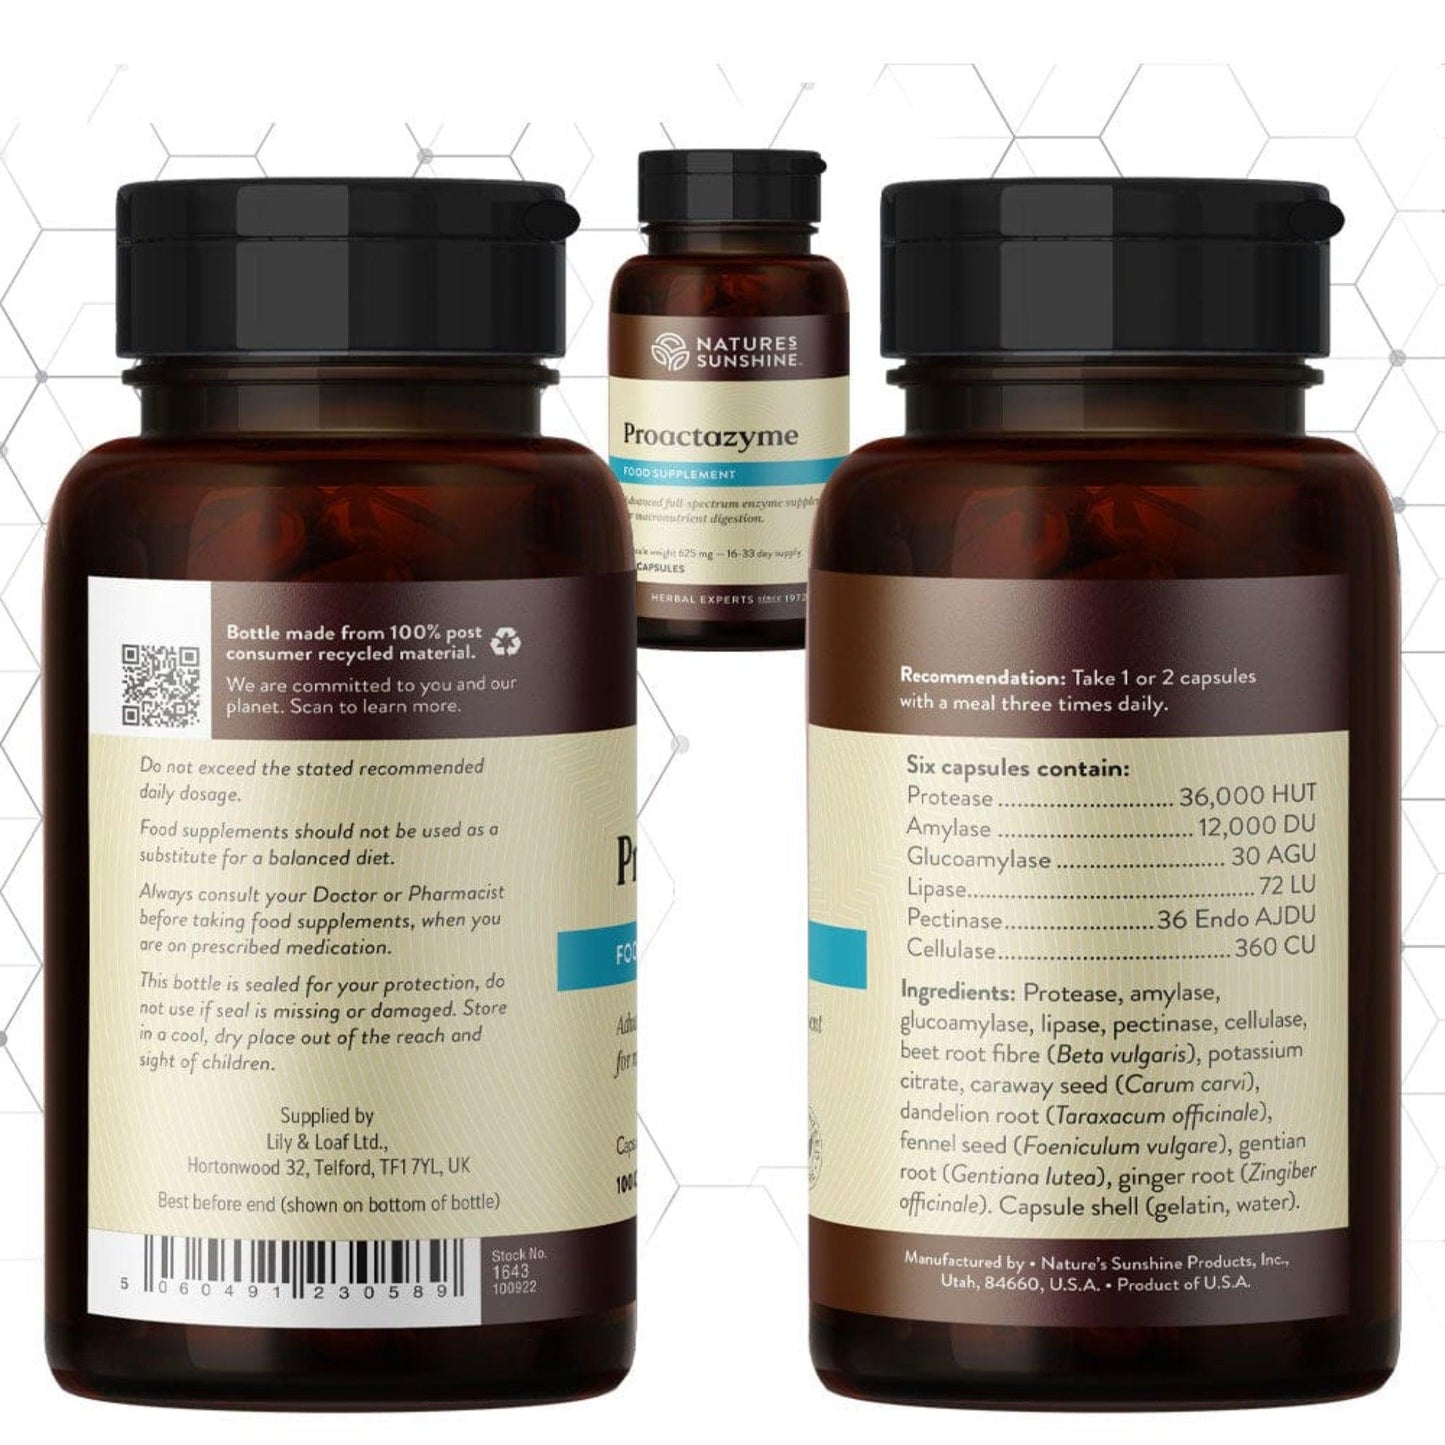 Dark amber bottle of Nature's Sunshine Proactazyme supplement, containing 100 capsules for a 16-33 day supply, supporting macronutrient digestion.